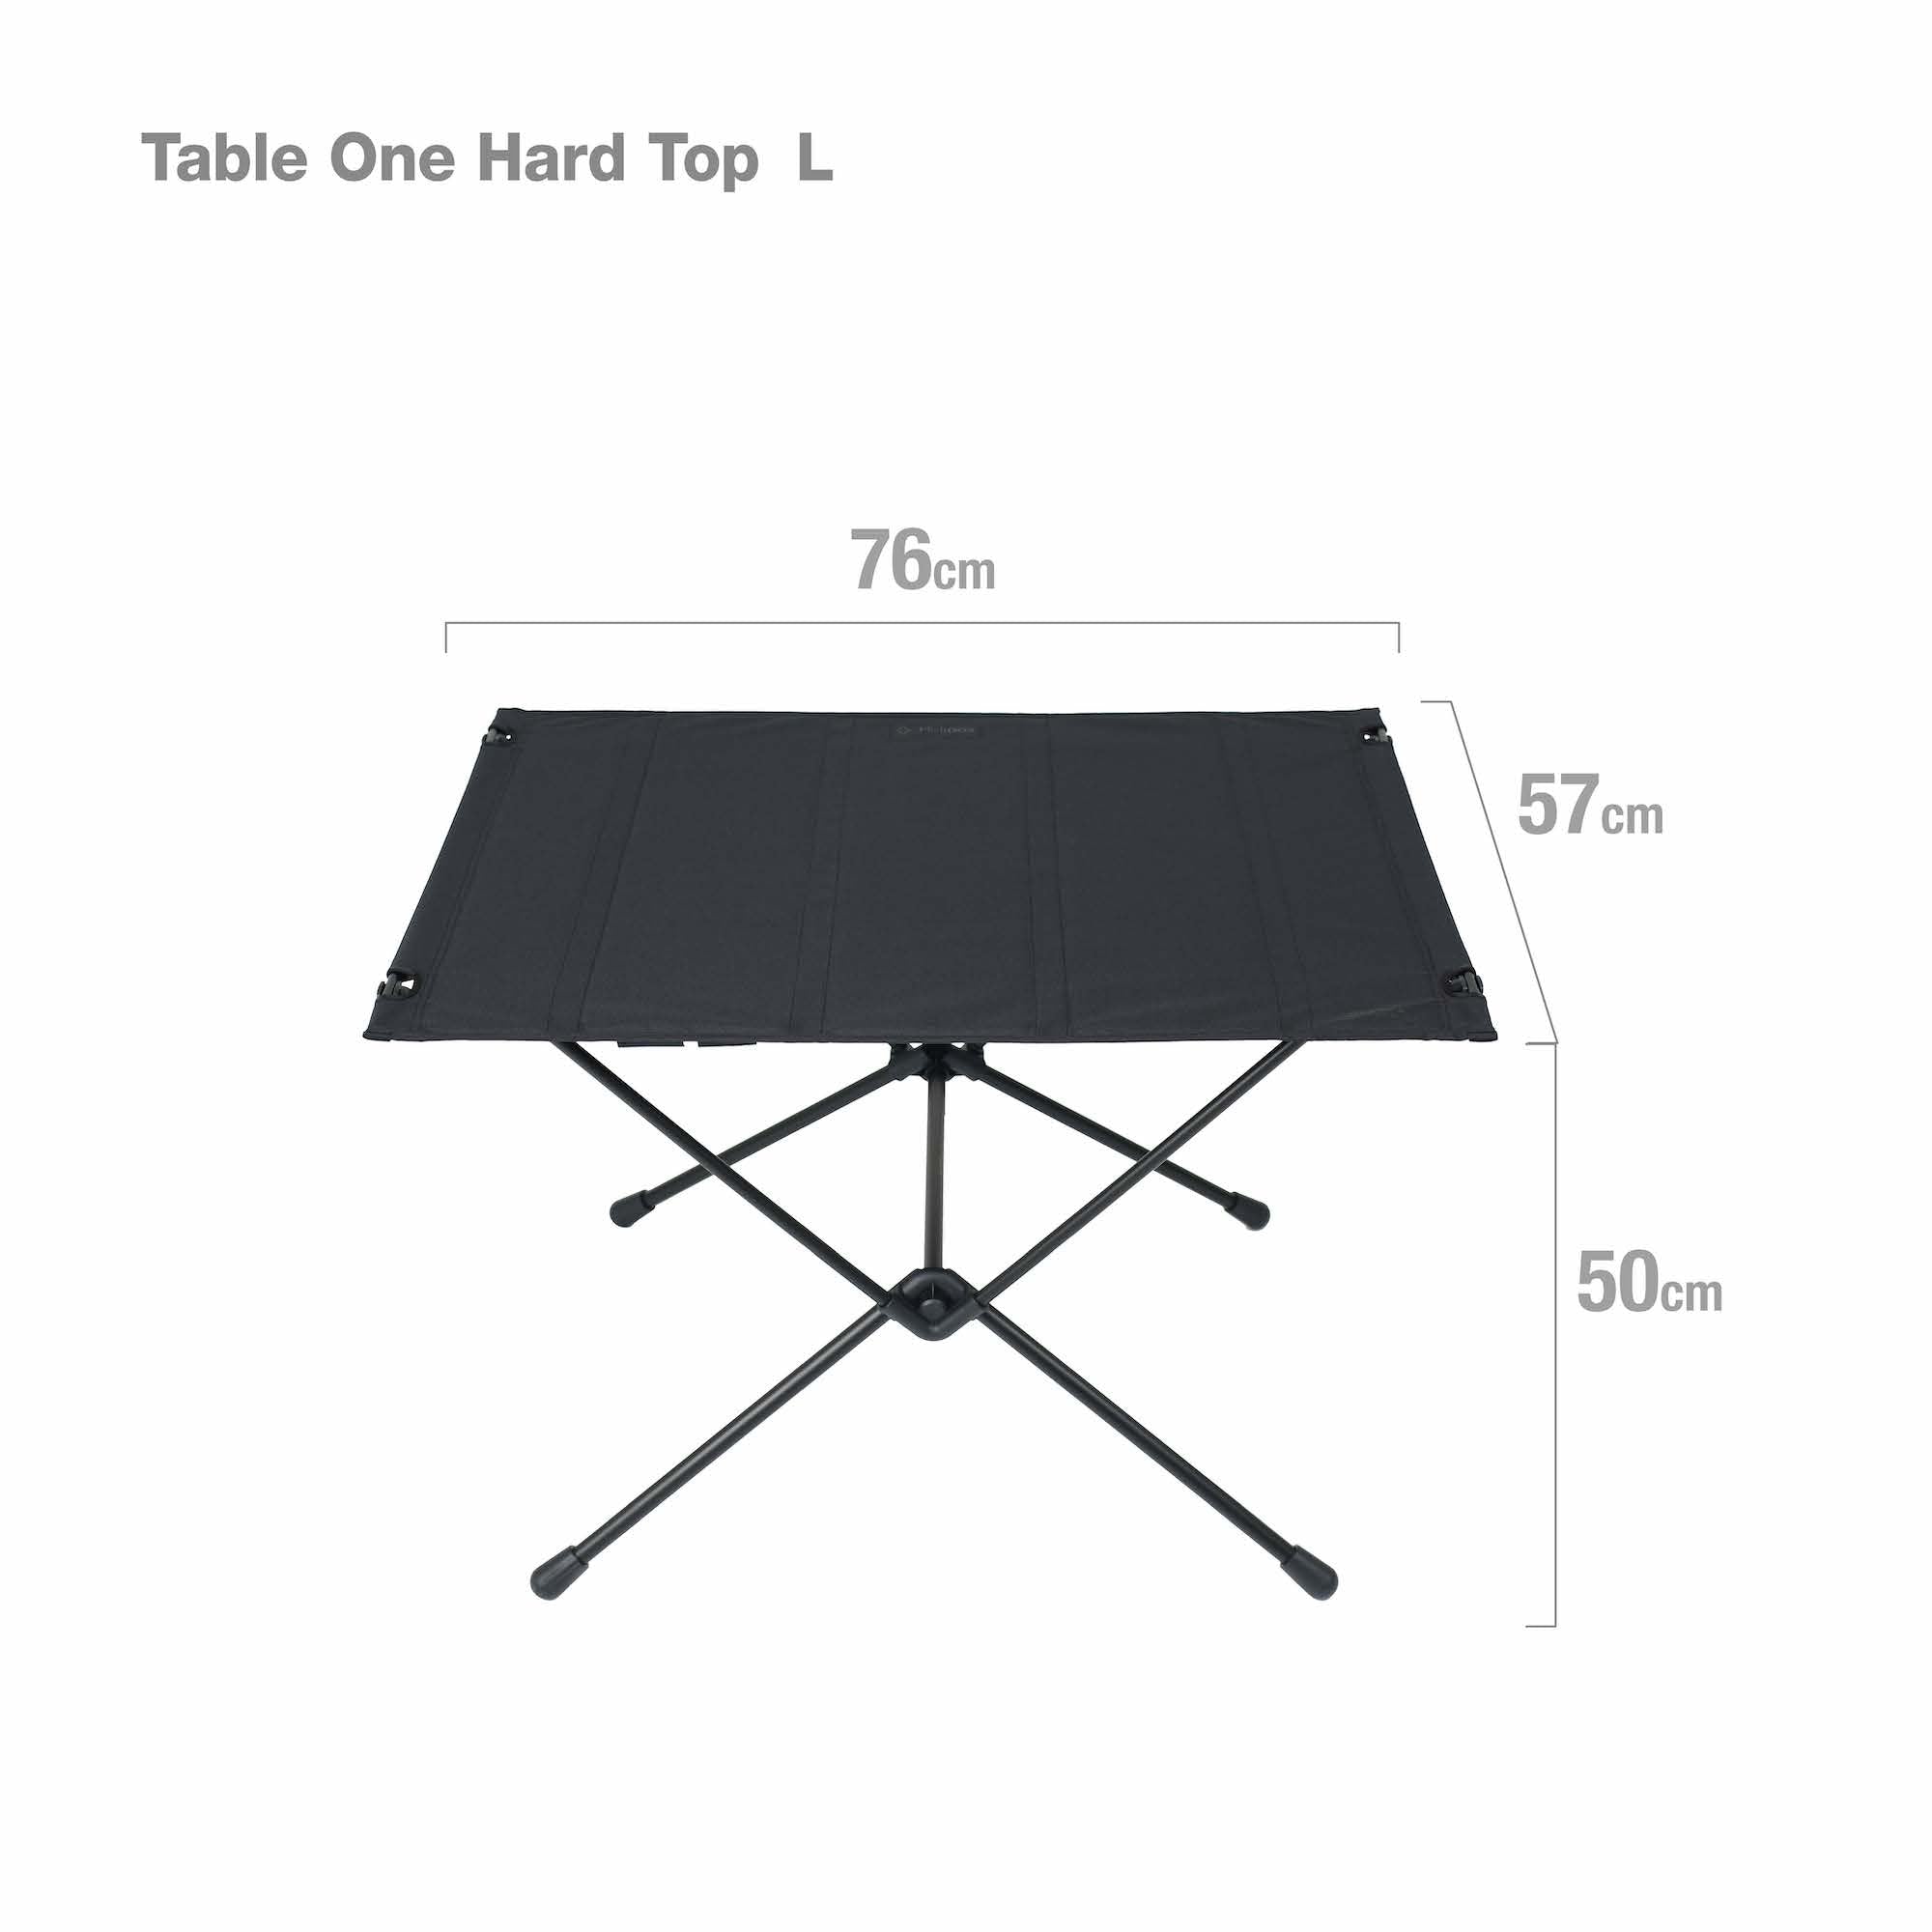 Table One Hard Top L - Blackout Edition